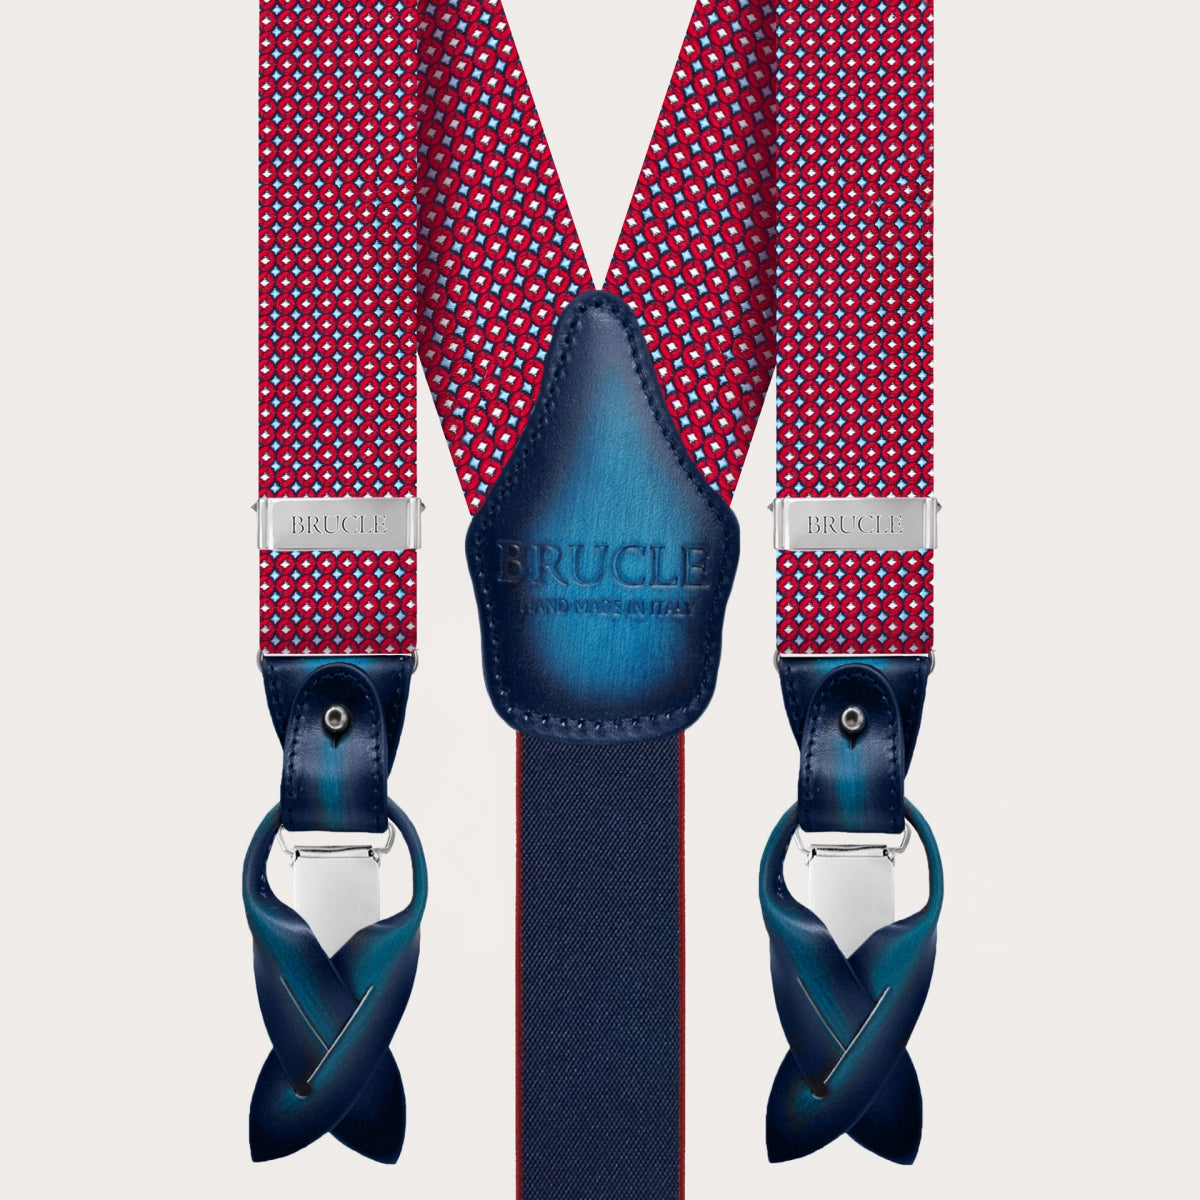 Suspenders in jacquard silk, red and light blue geometric pattern